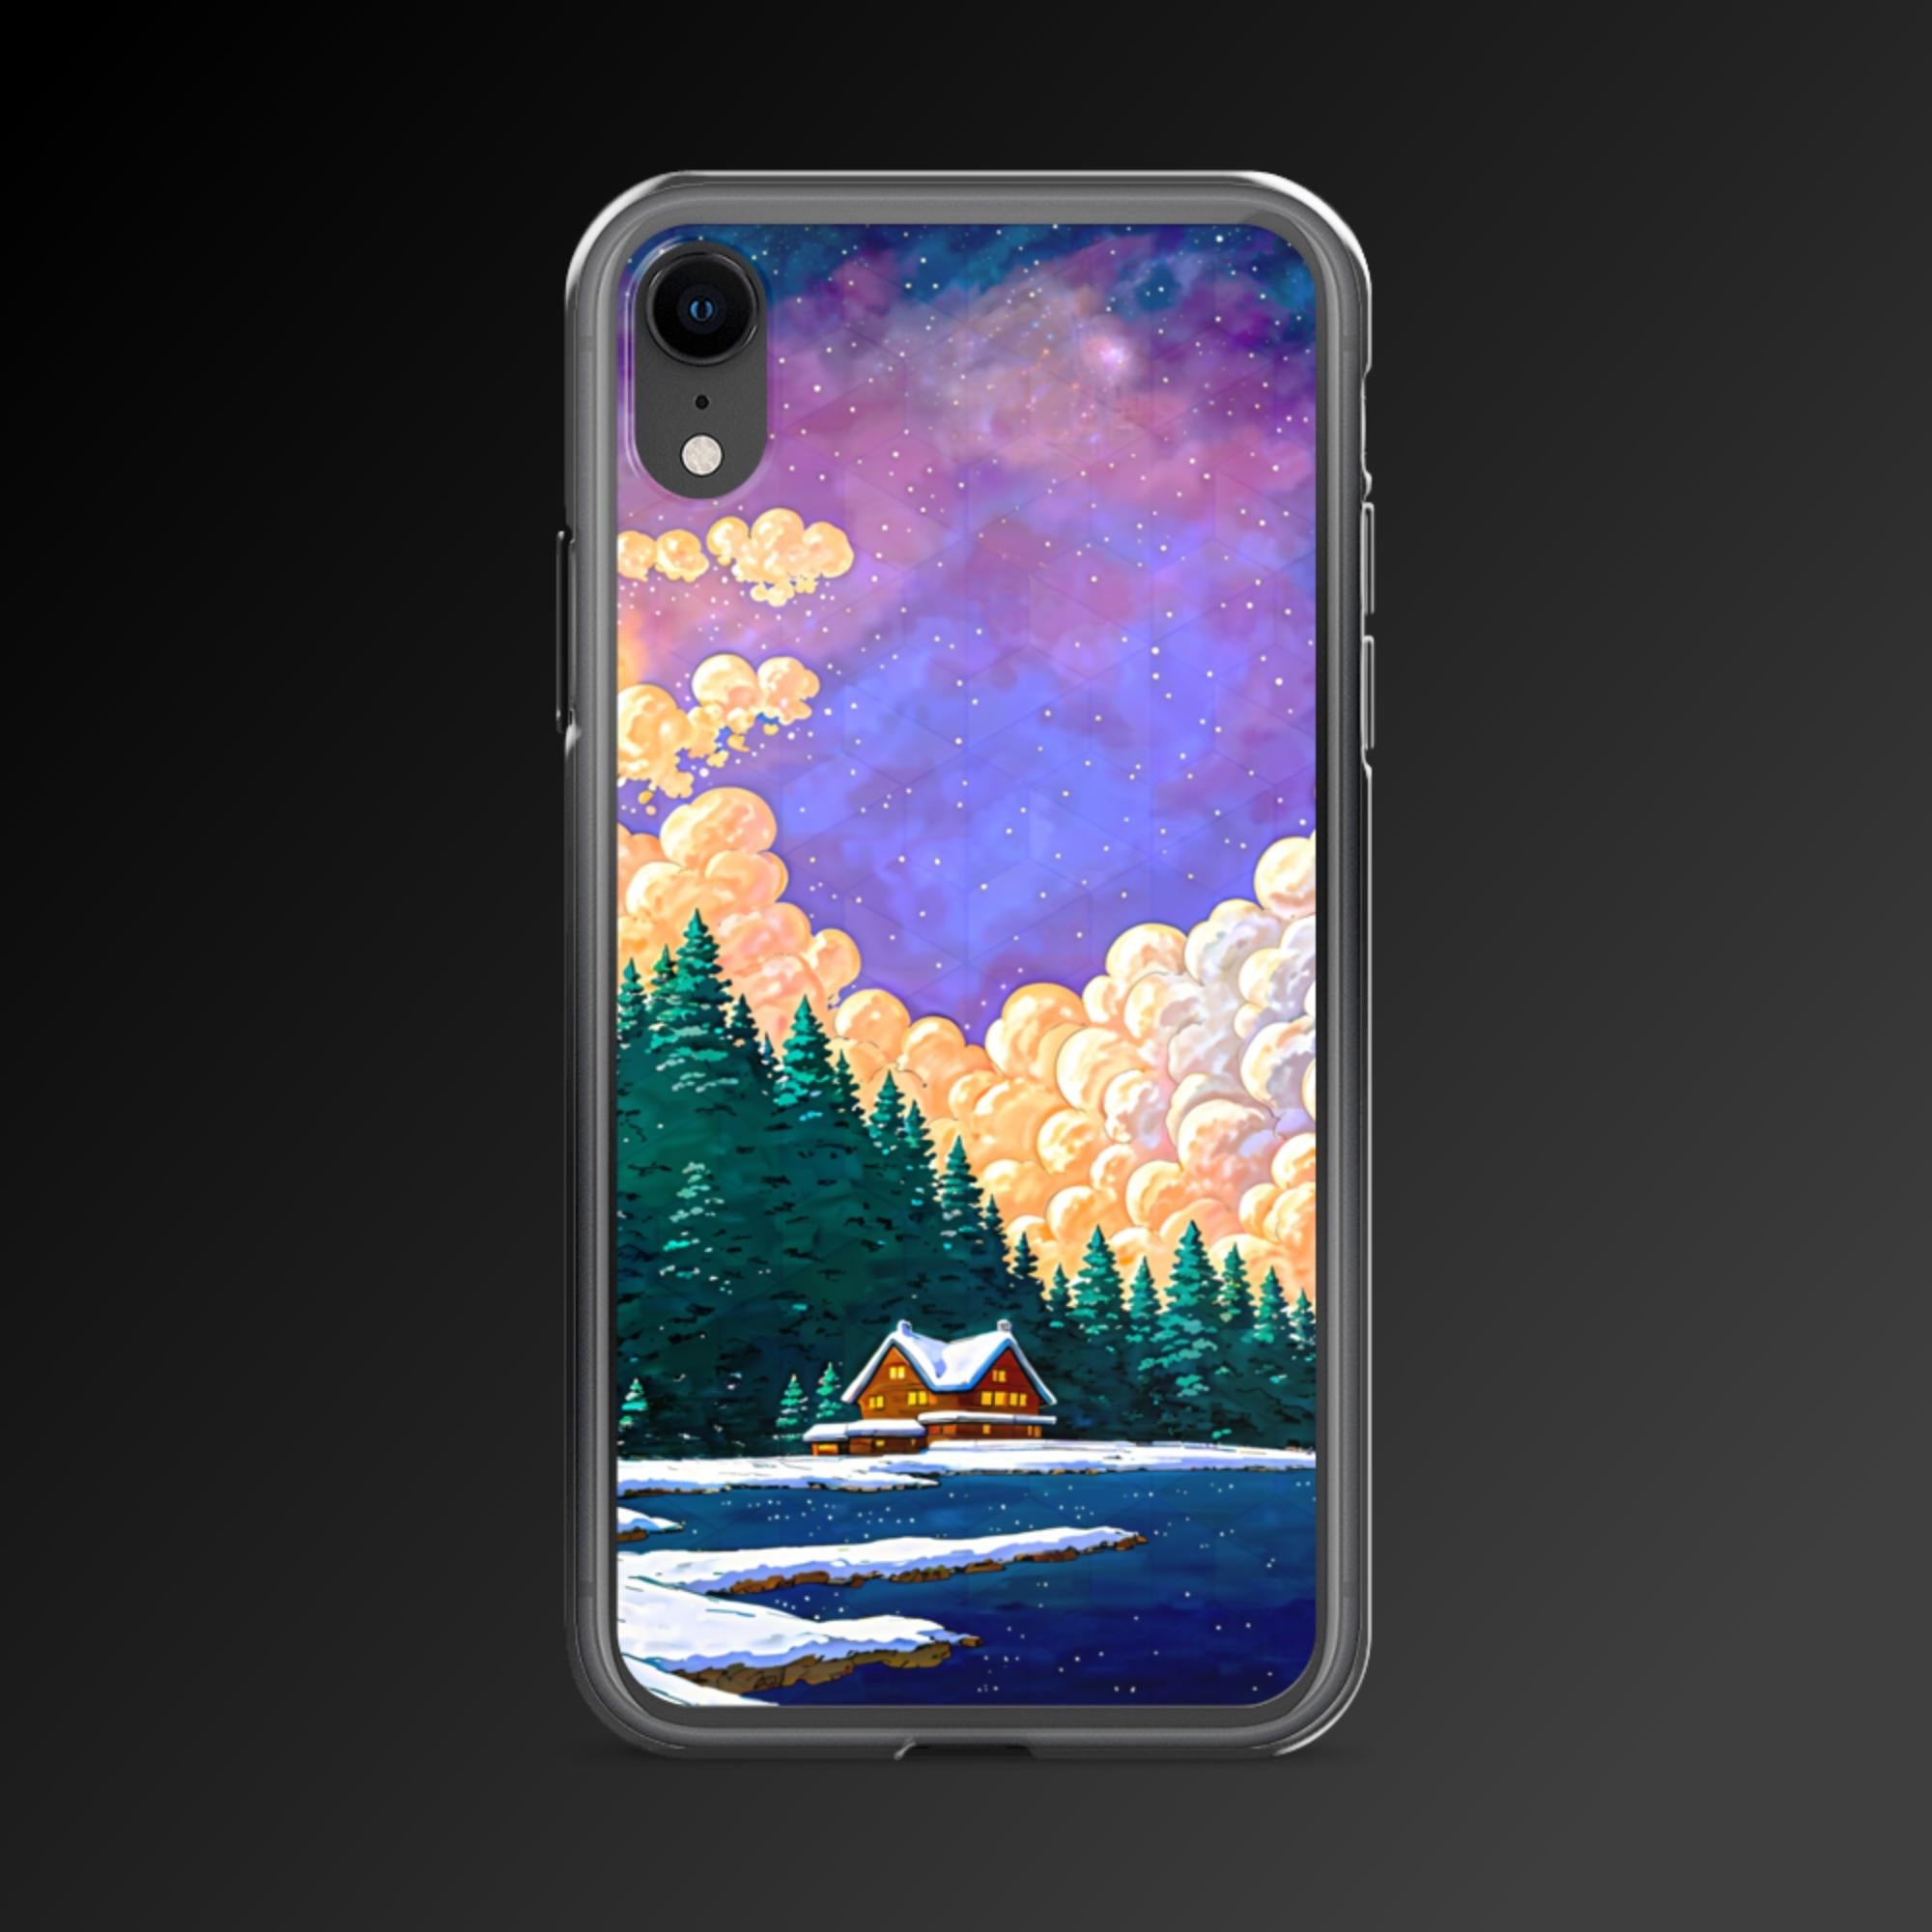 "Chilly cabin" clear iphone case - Clear iphone case - Ever colorful